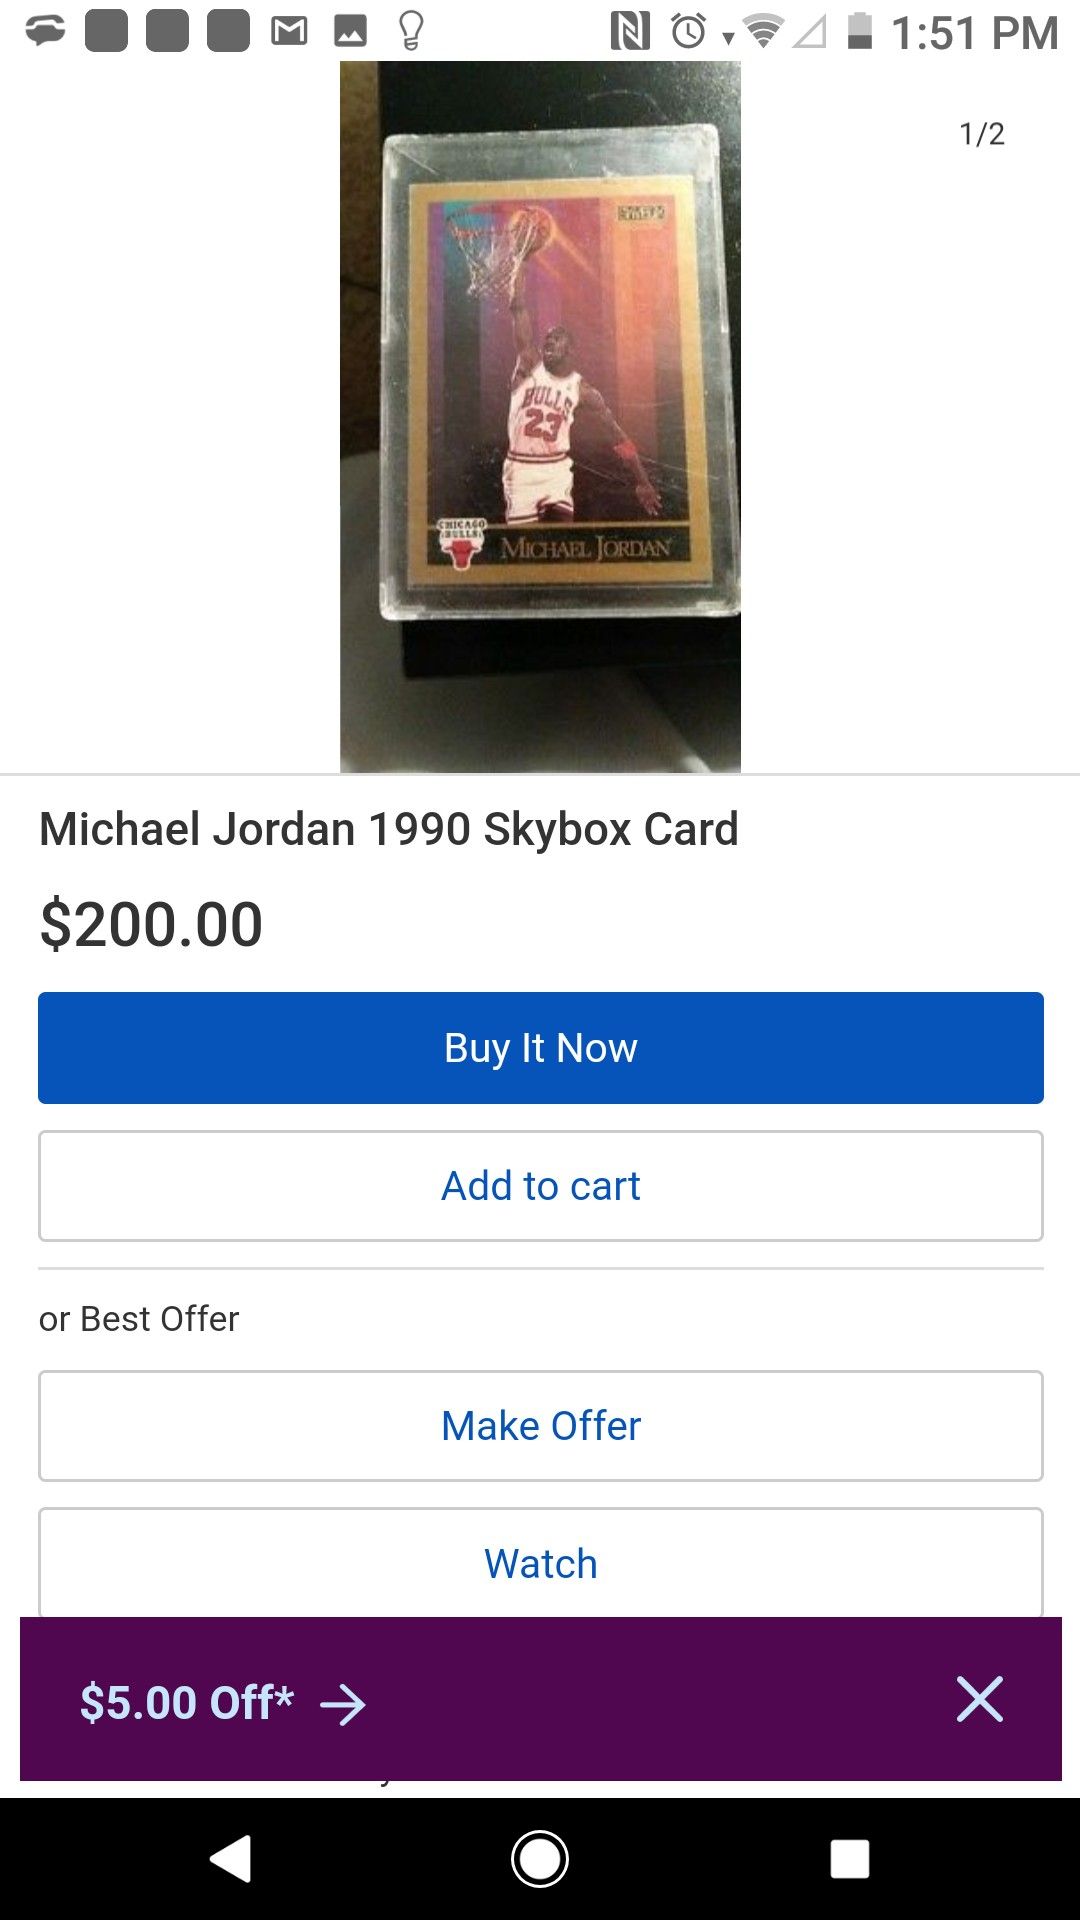 1990 Skybox Michael Jordan card in mint condition and hard plastic